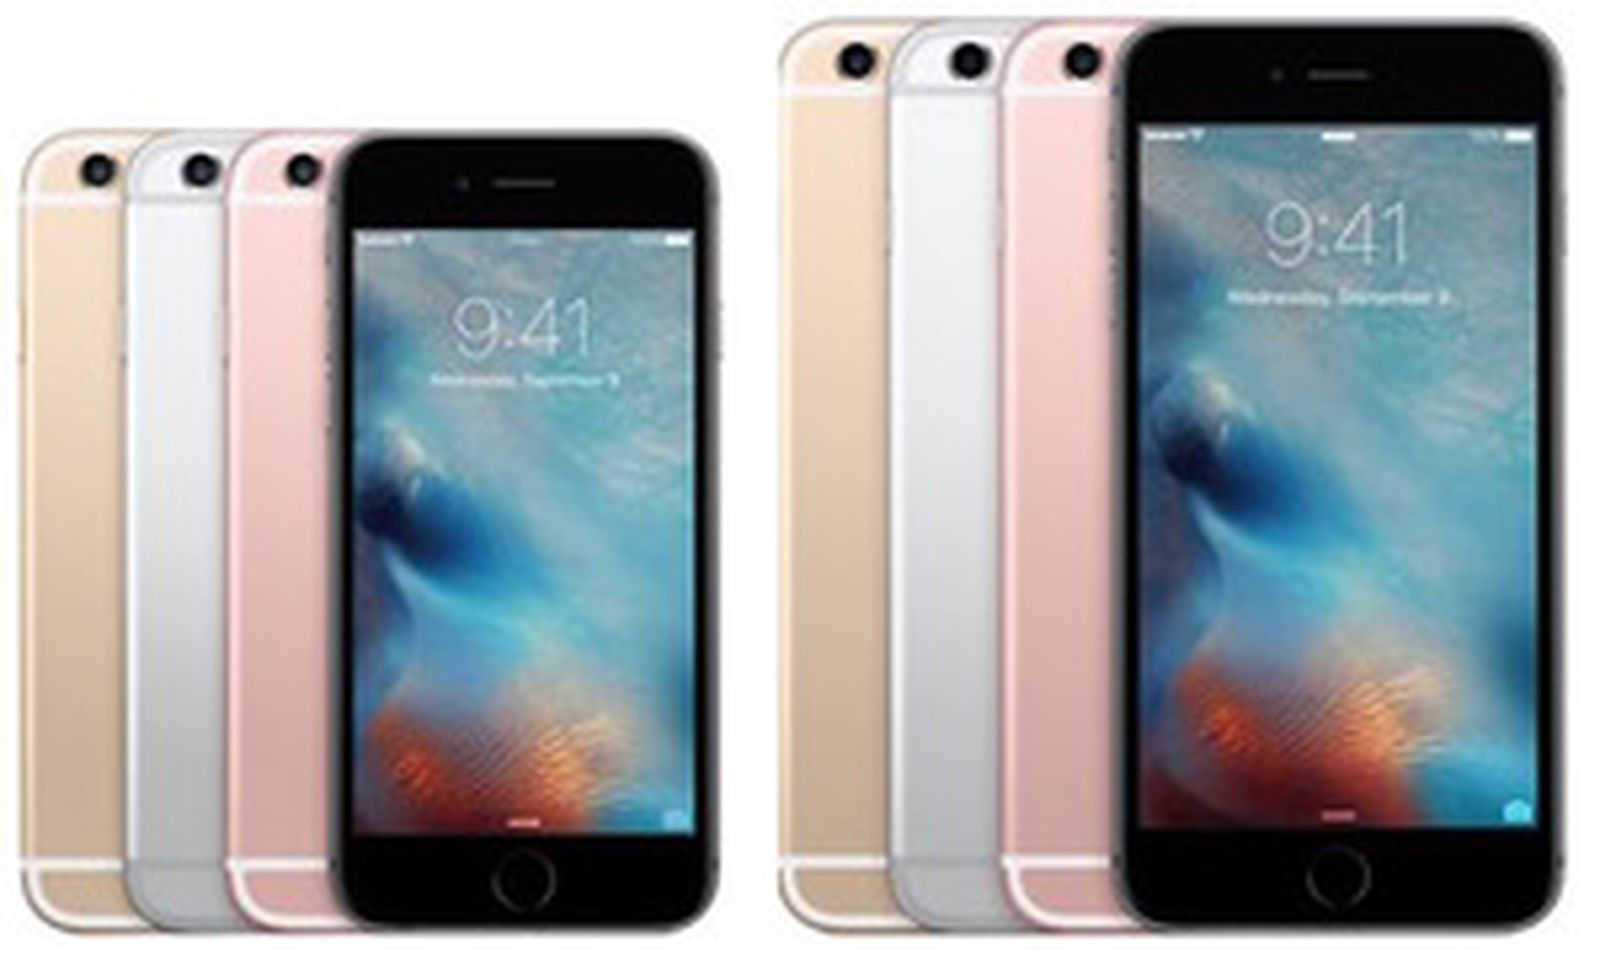 iPhone 6s: Reviews, How to Buy, and Details